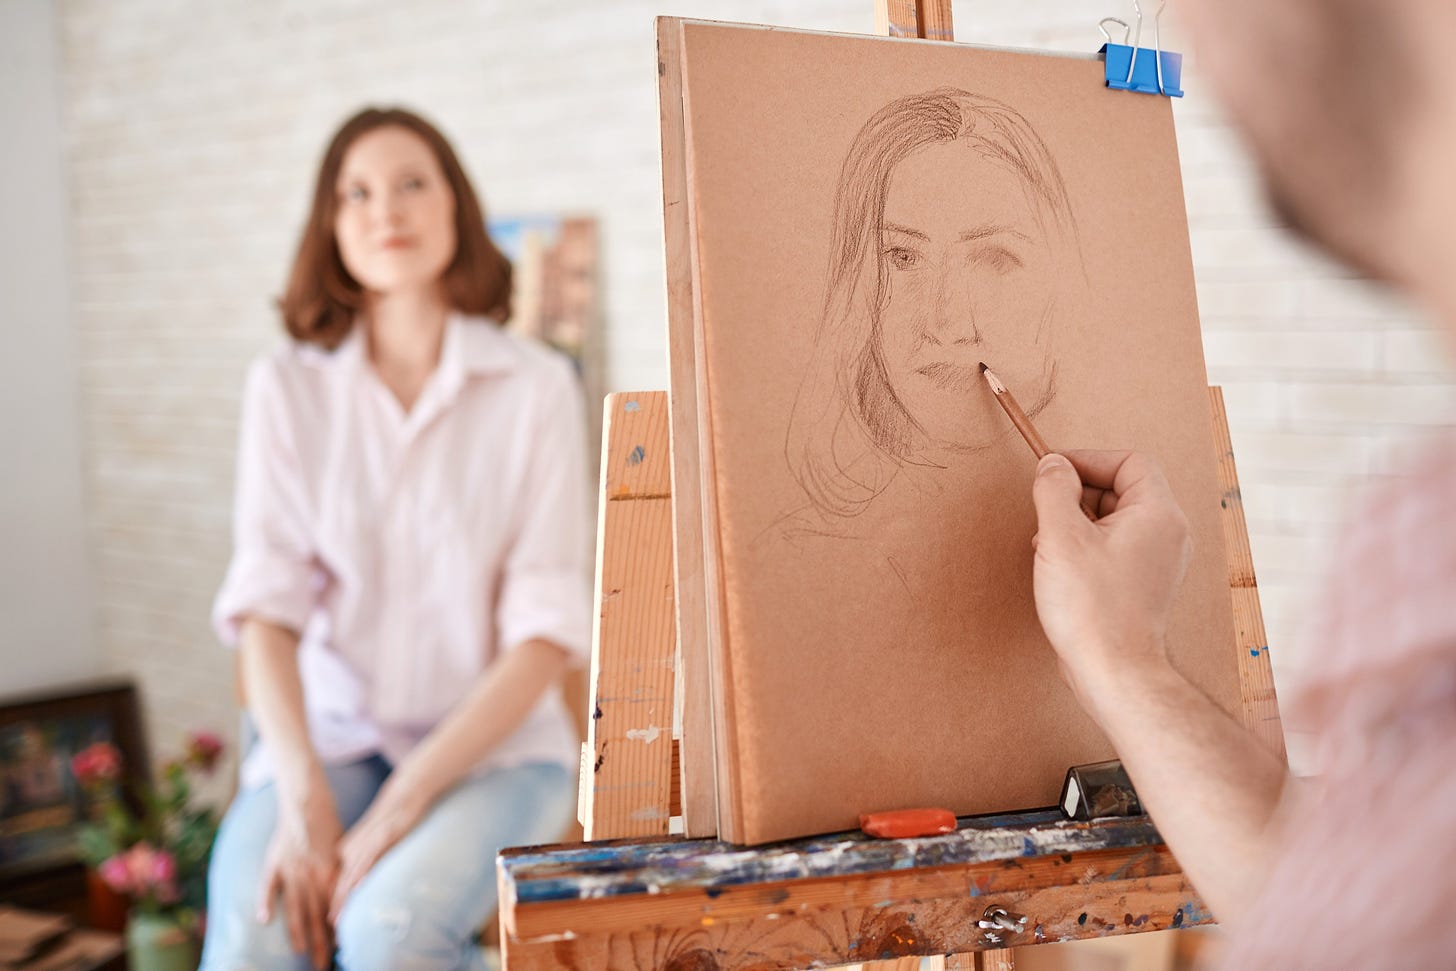 Artist sketching a young woman.